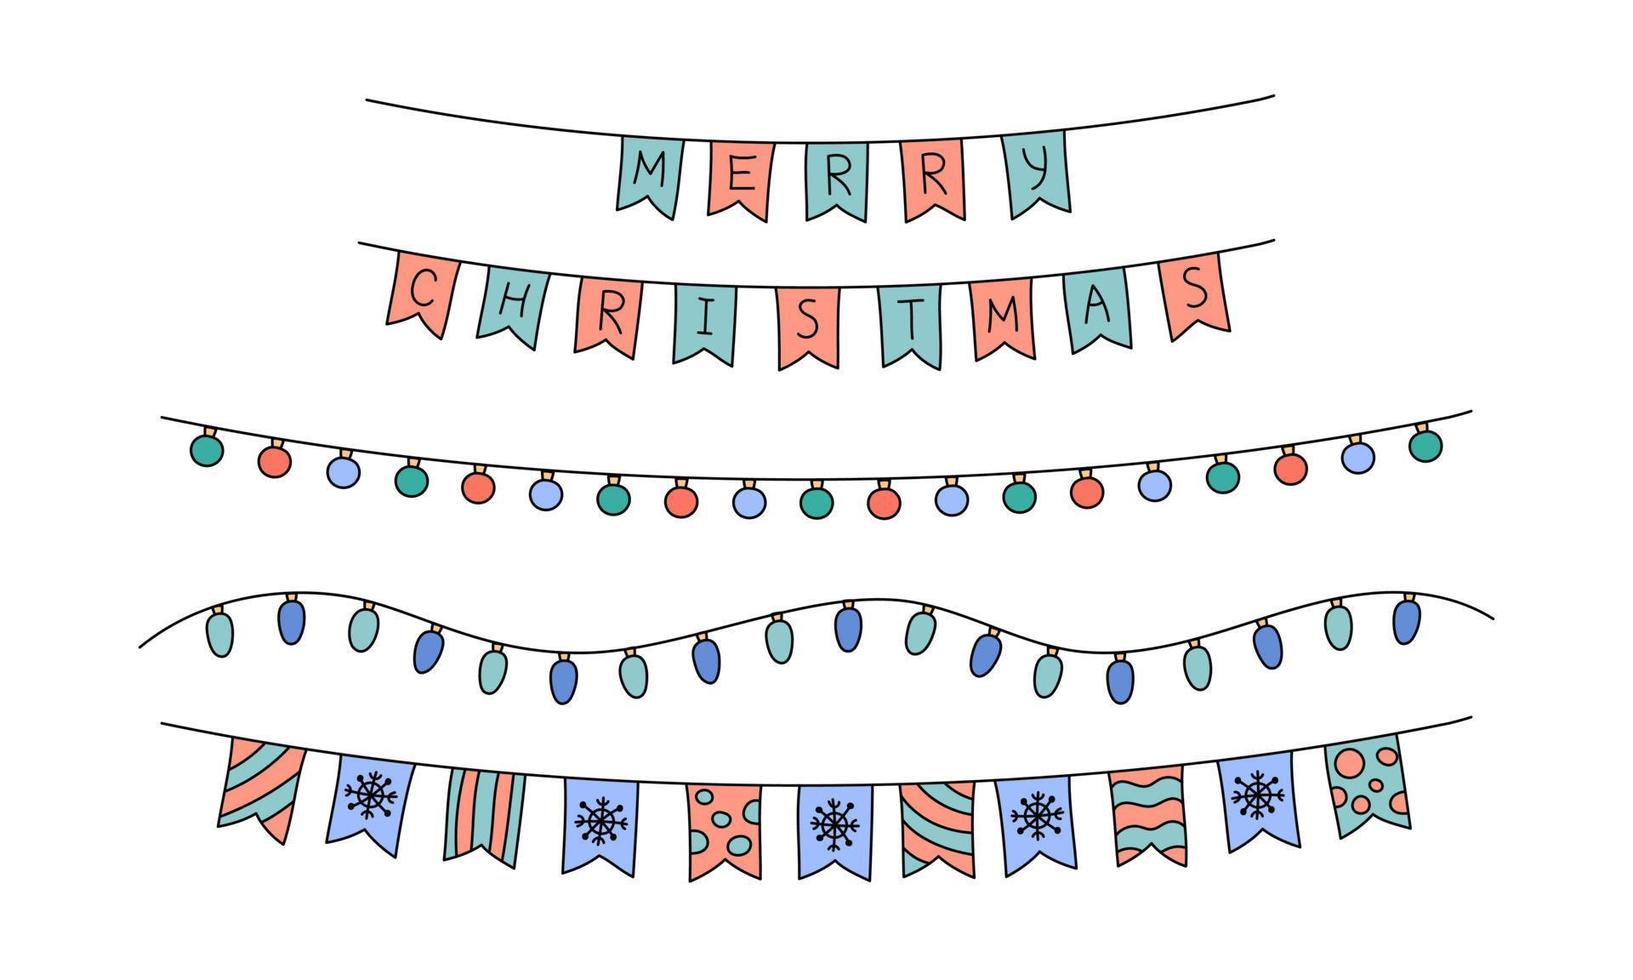 Chrismas garlands and flags vector set. Funny doodles. Outline illustrations of cute isolated festive hanging Christmas decorations, lights, bulbs